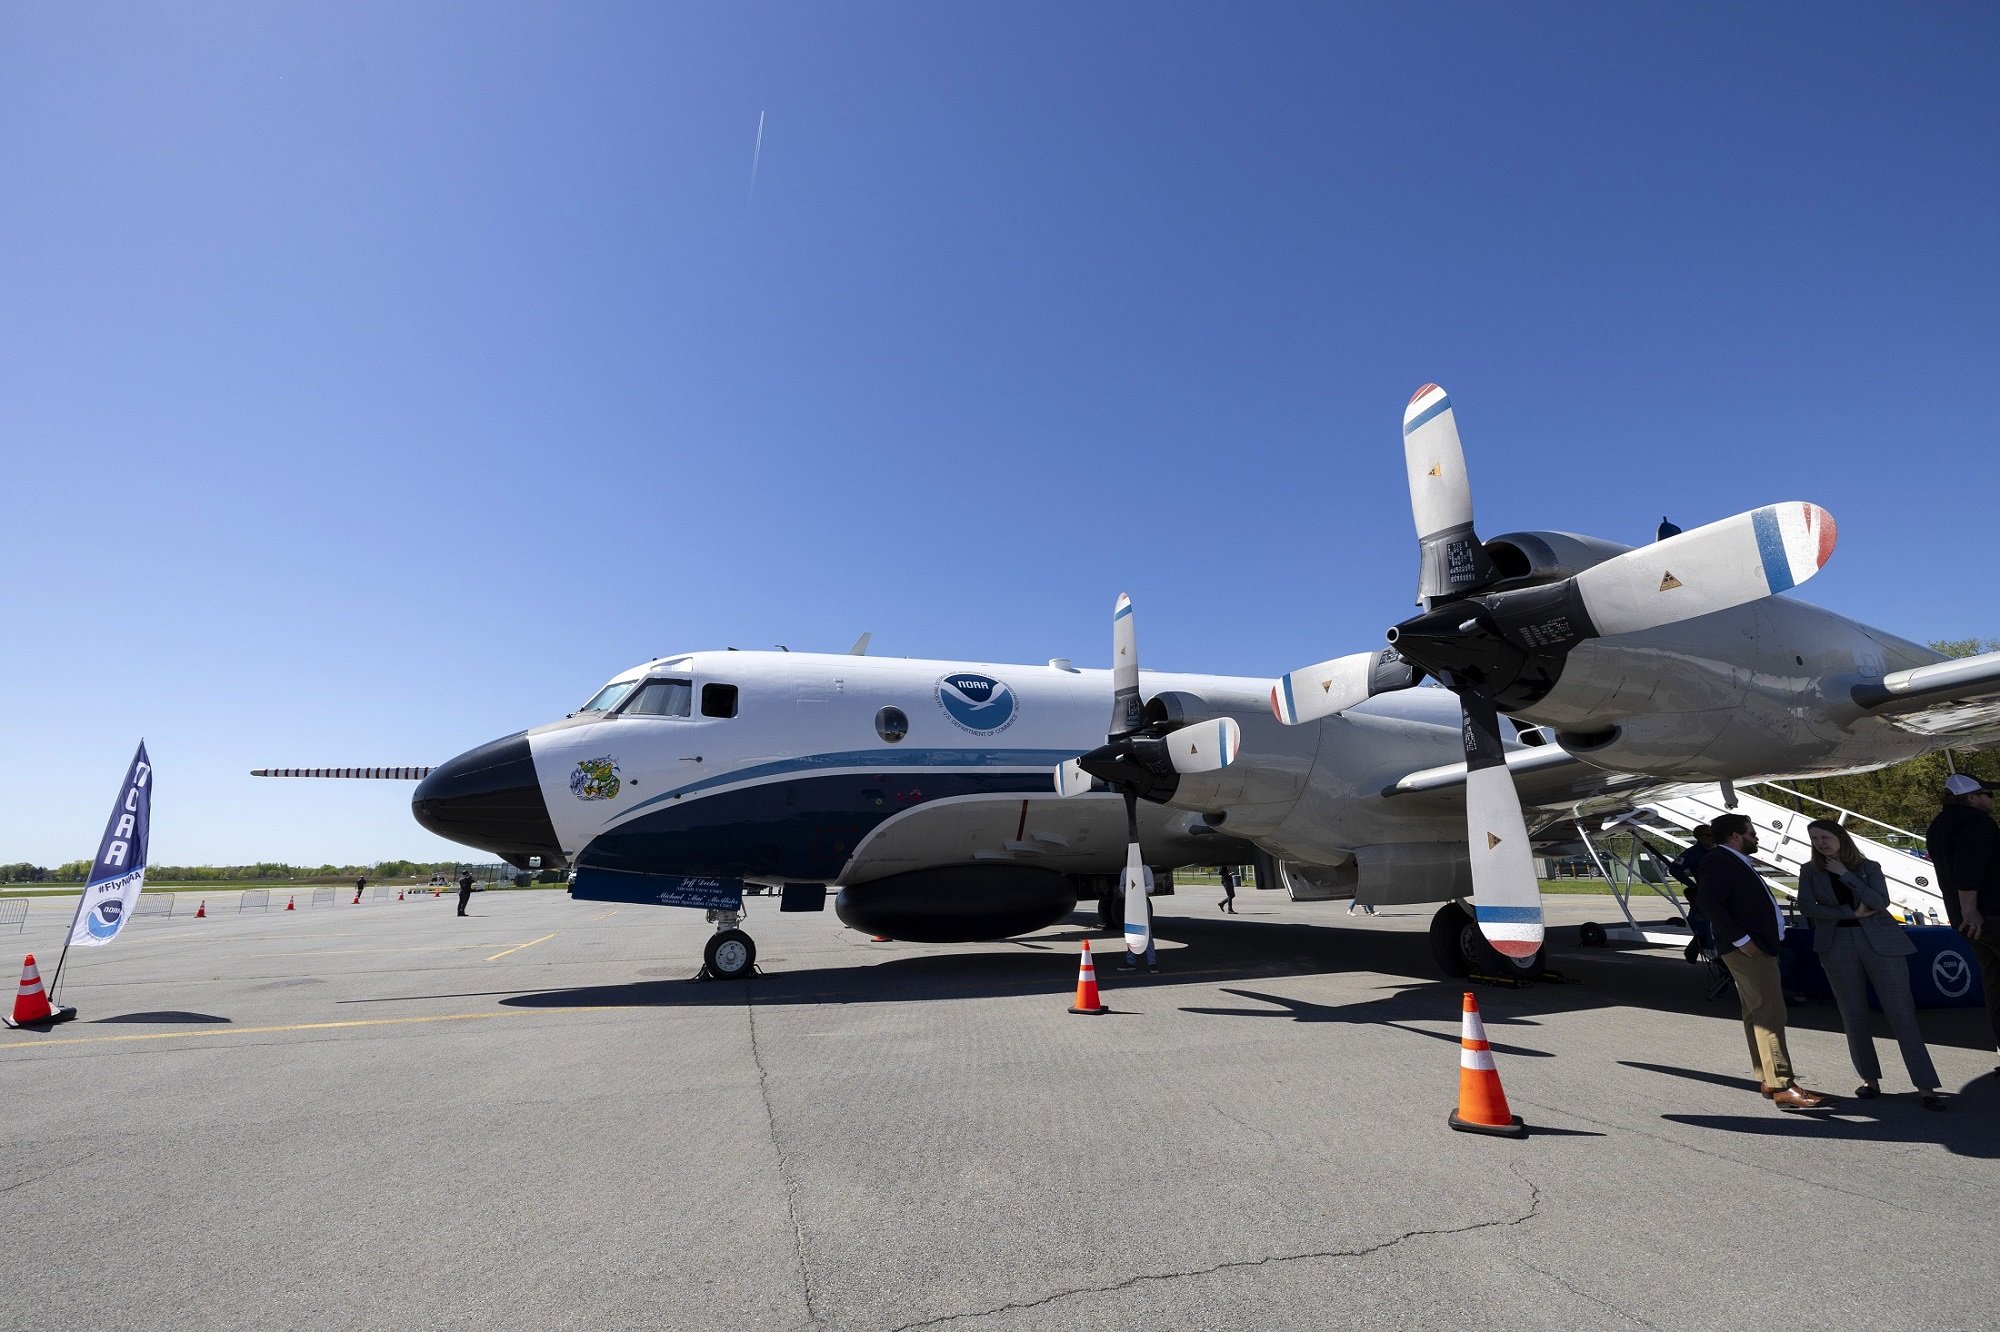 A NOAA Hurricane Hunter stationed on the tarmac of the Albany International Airport. 